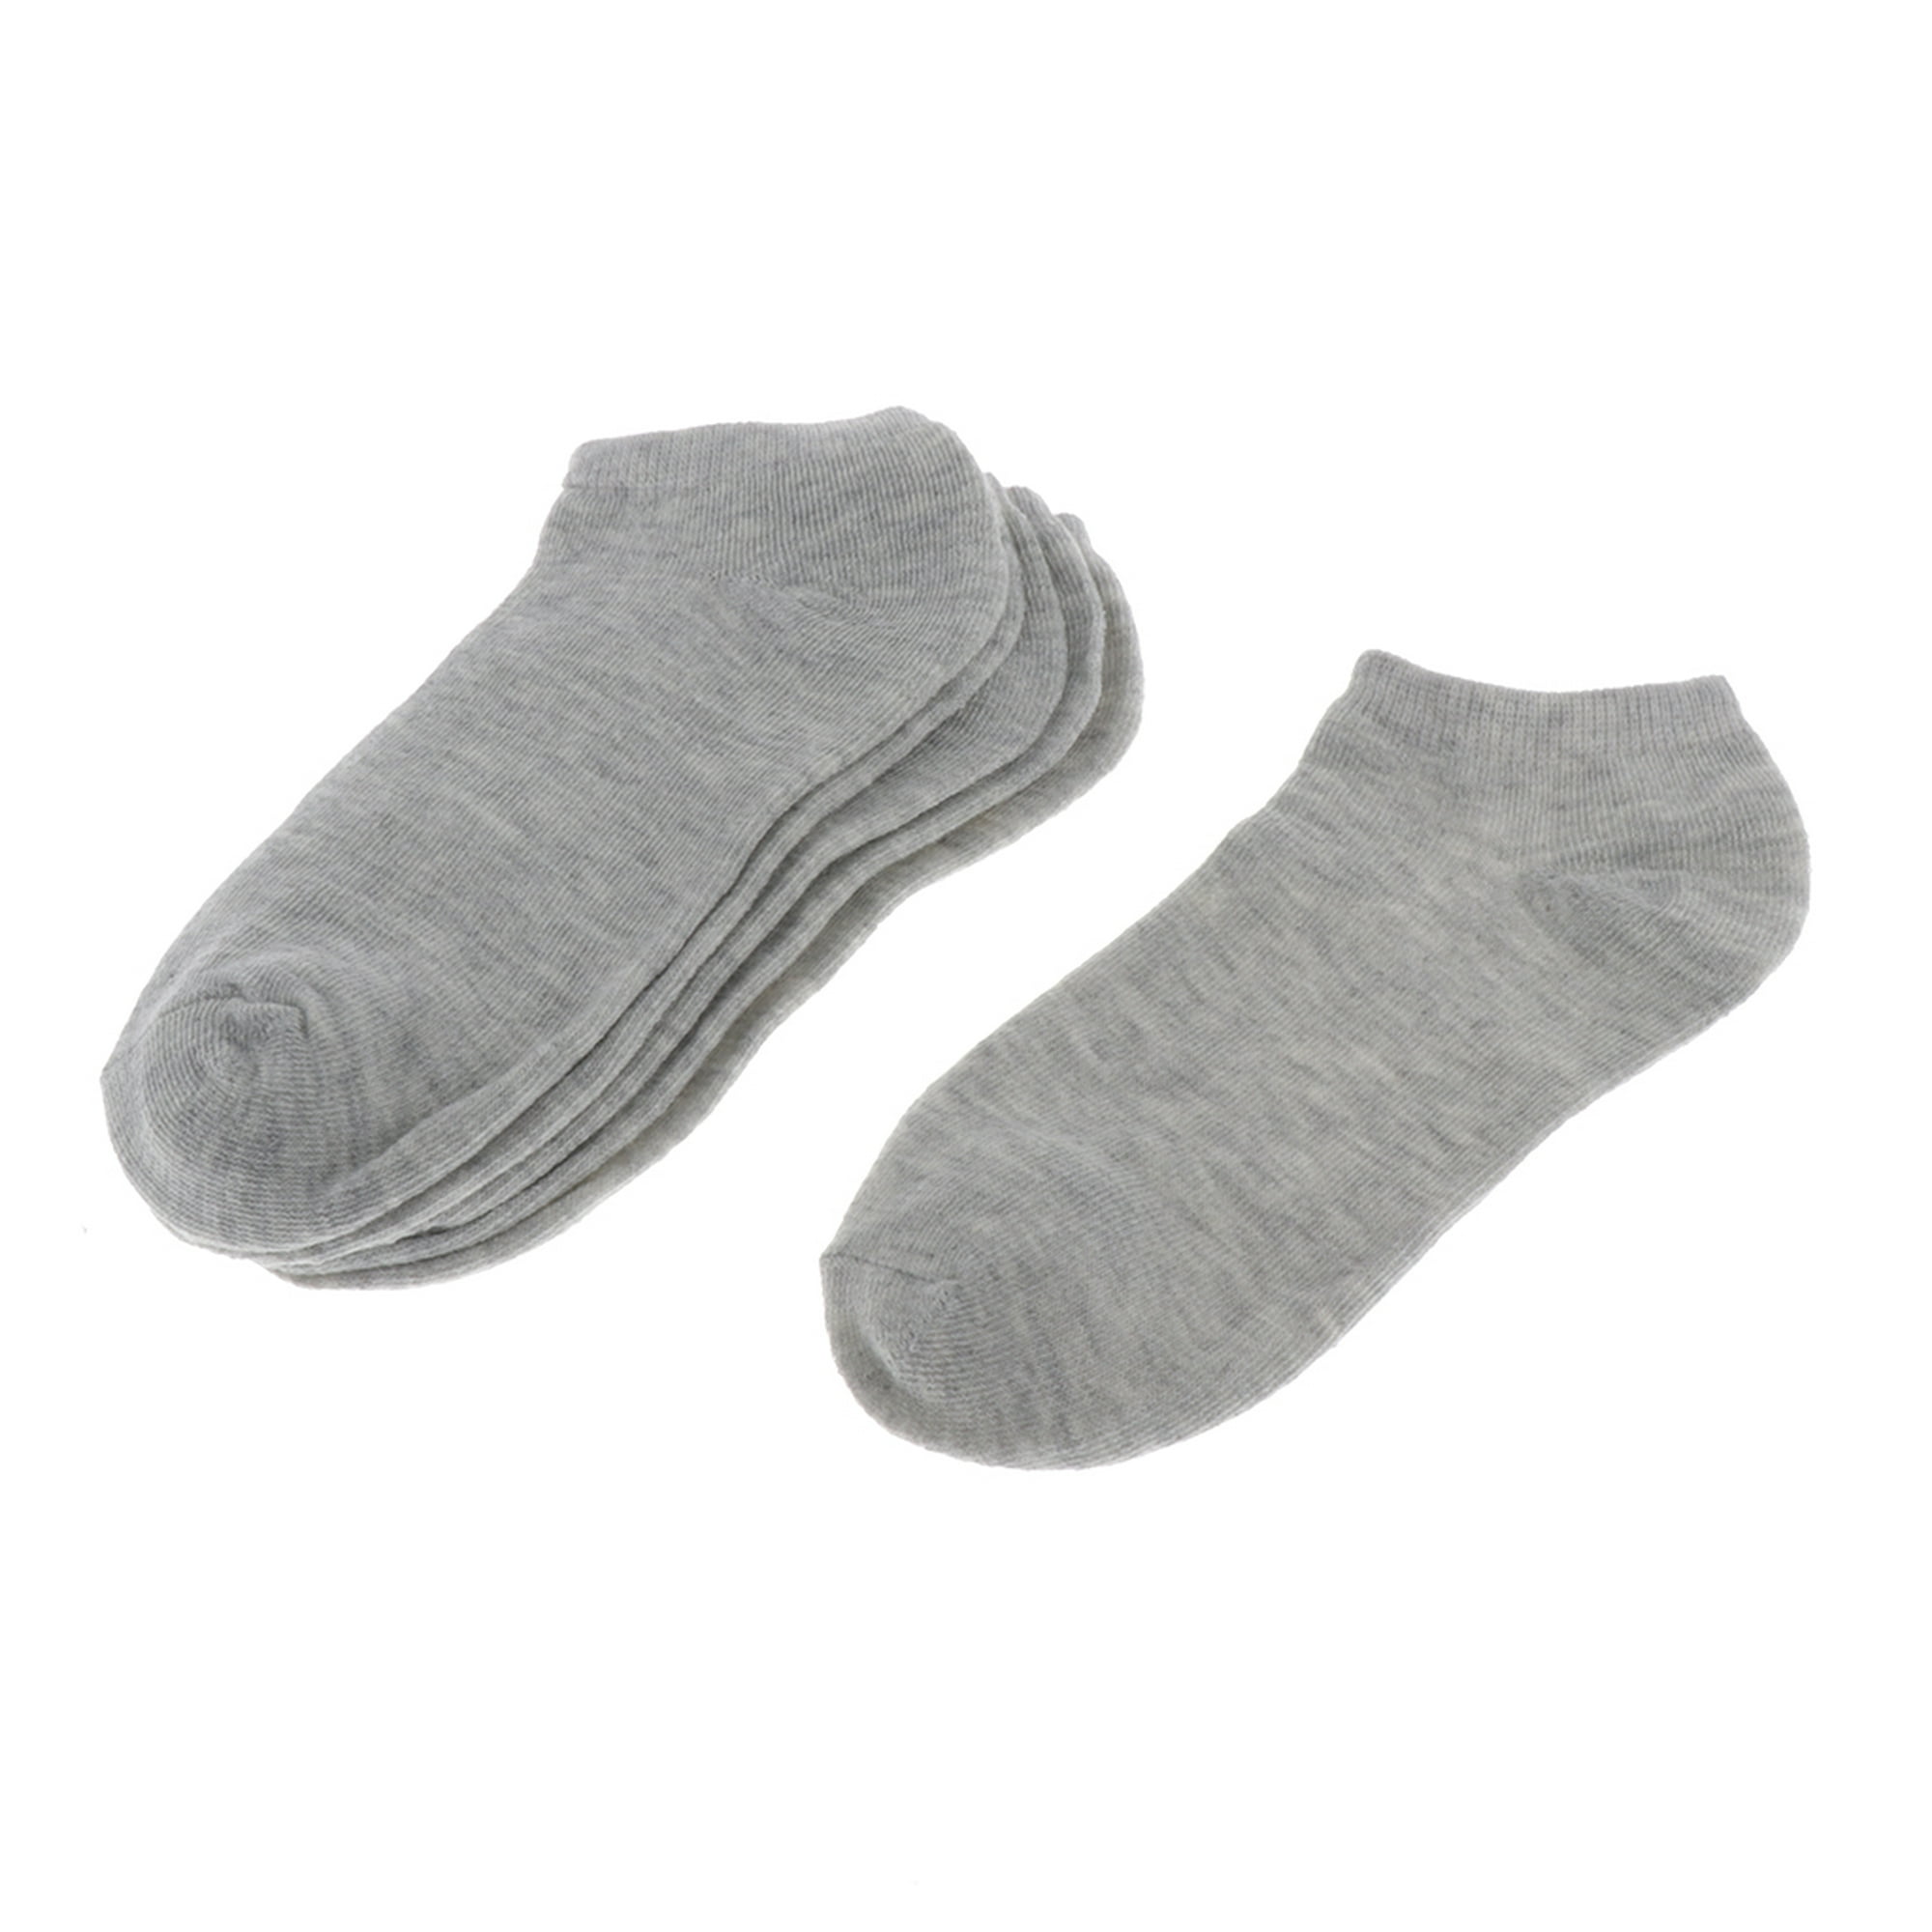 Lenny – Calcetines Invisibles Hombre Casual (Pack 3 Calcetines